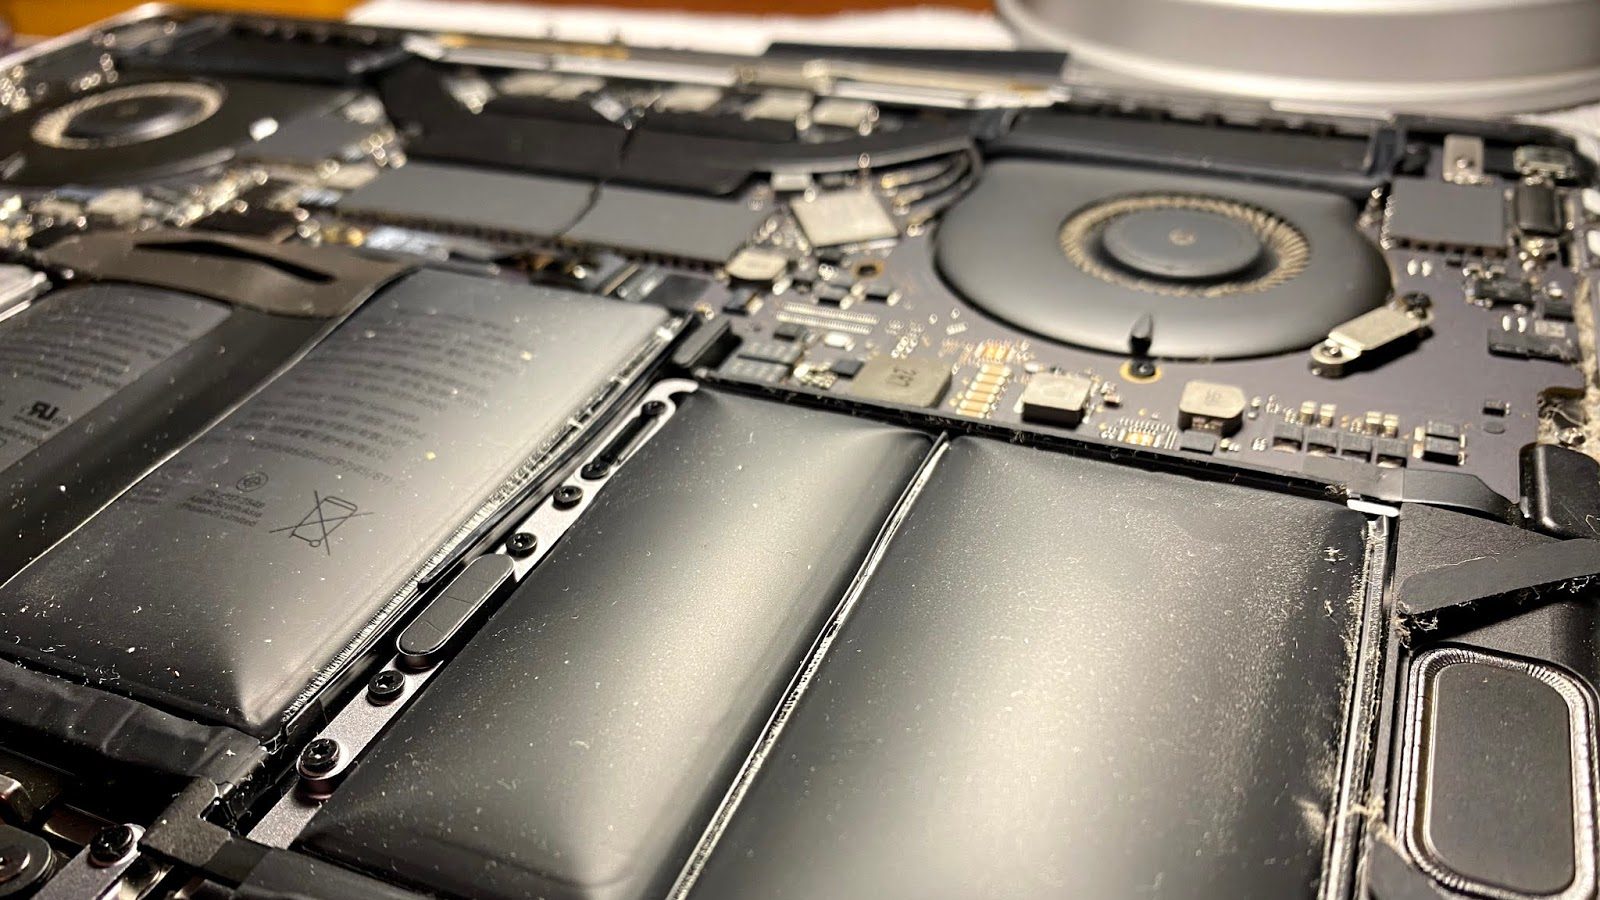 Hack Lets Intel MacBook Run Without A Battery